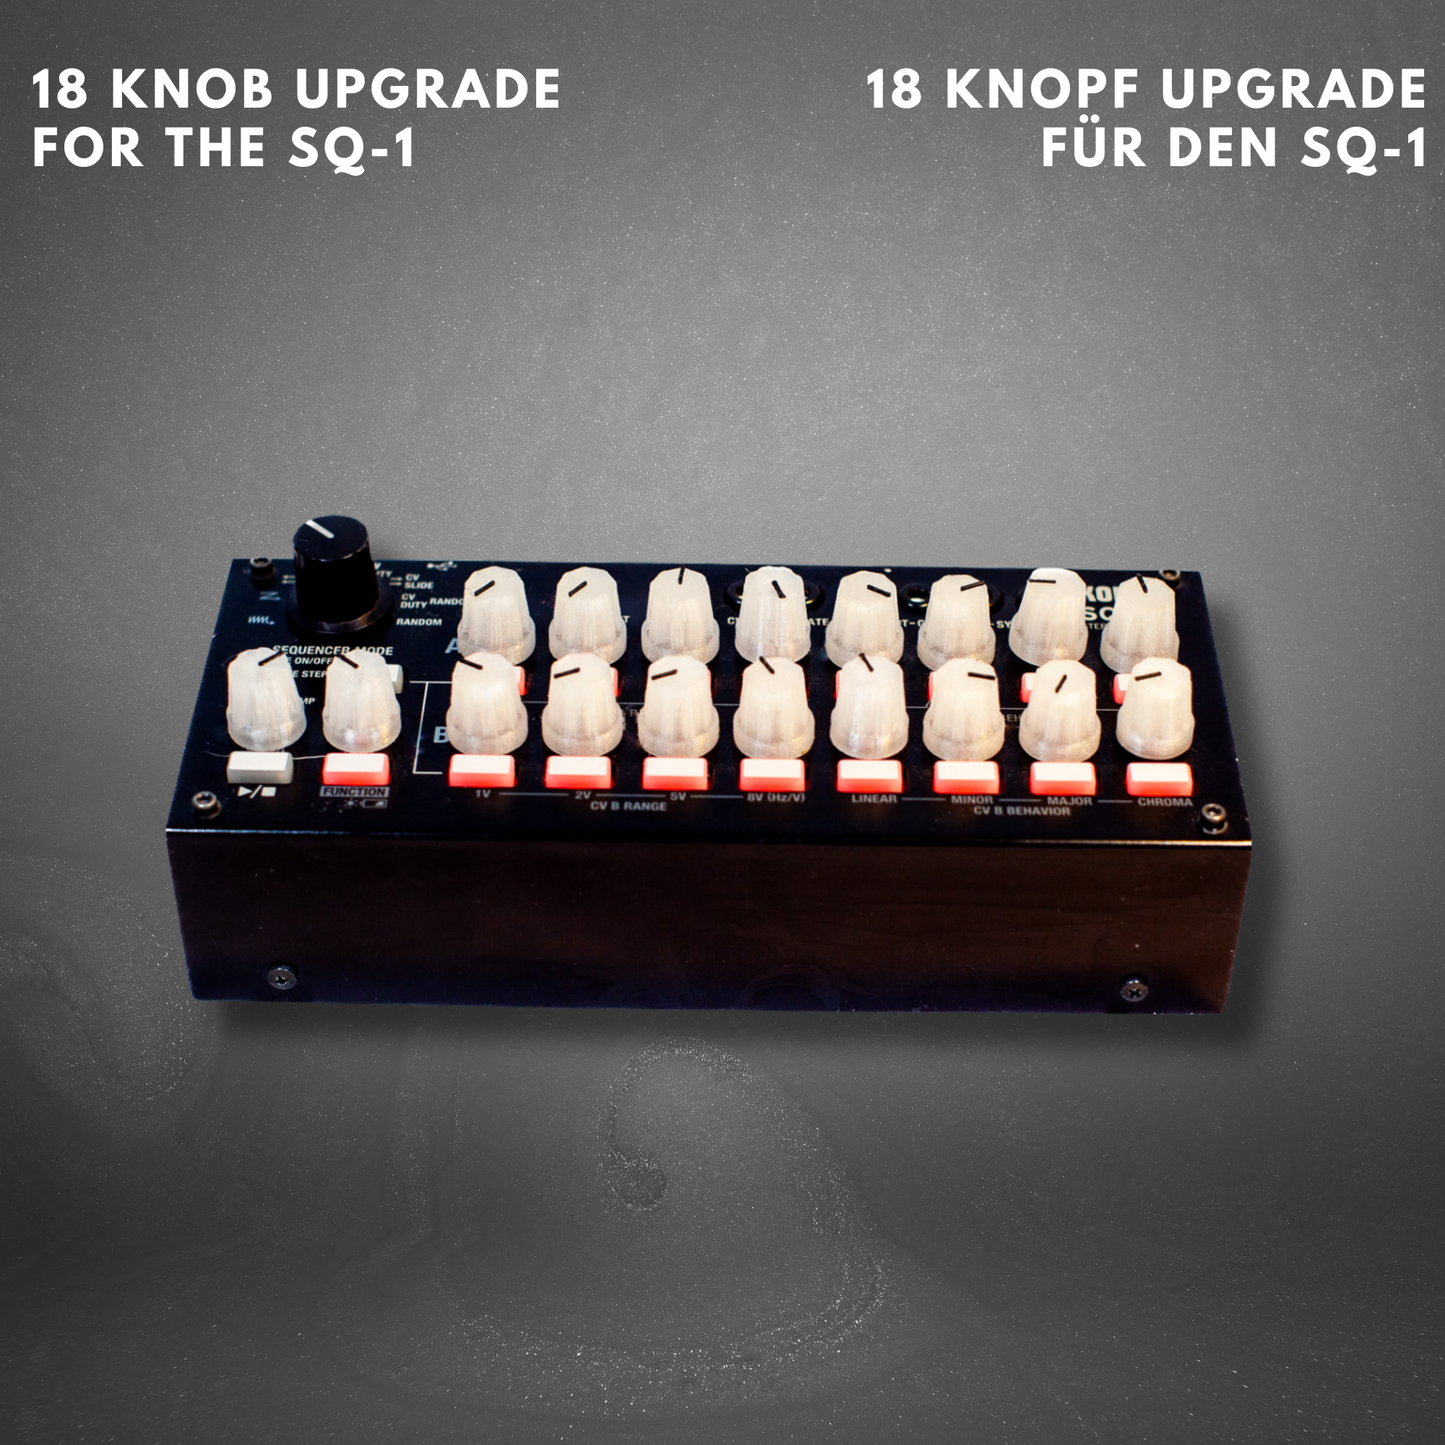 18 knob upgrade for the Korg SQ-1 sequencer